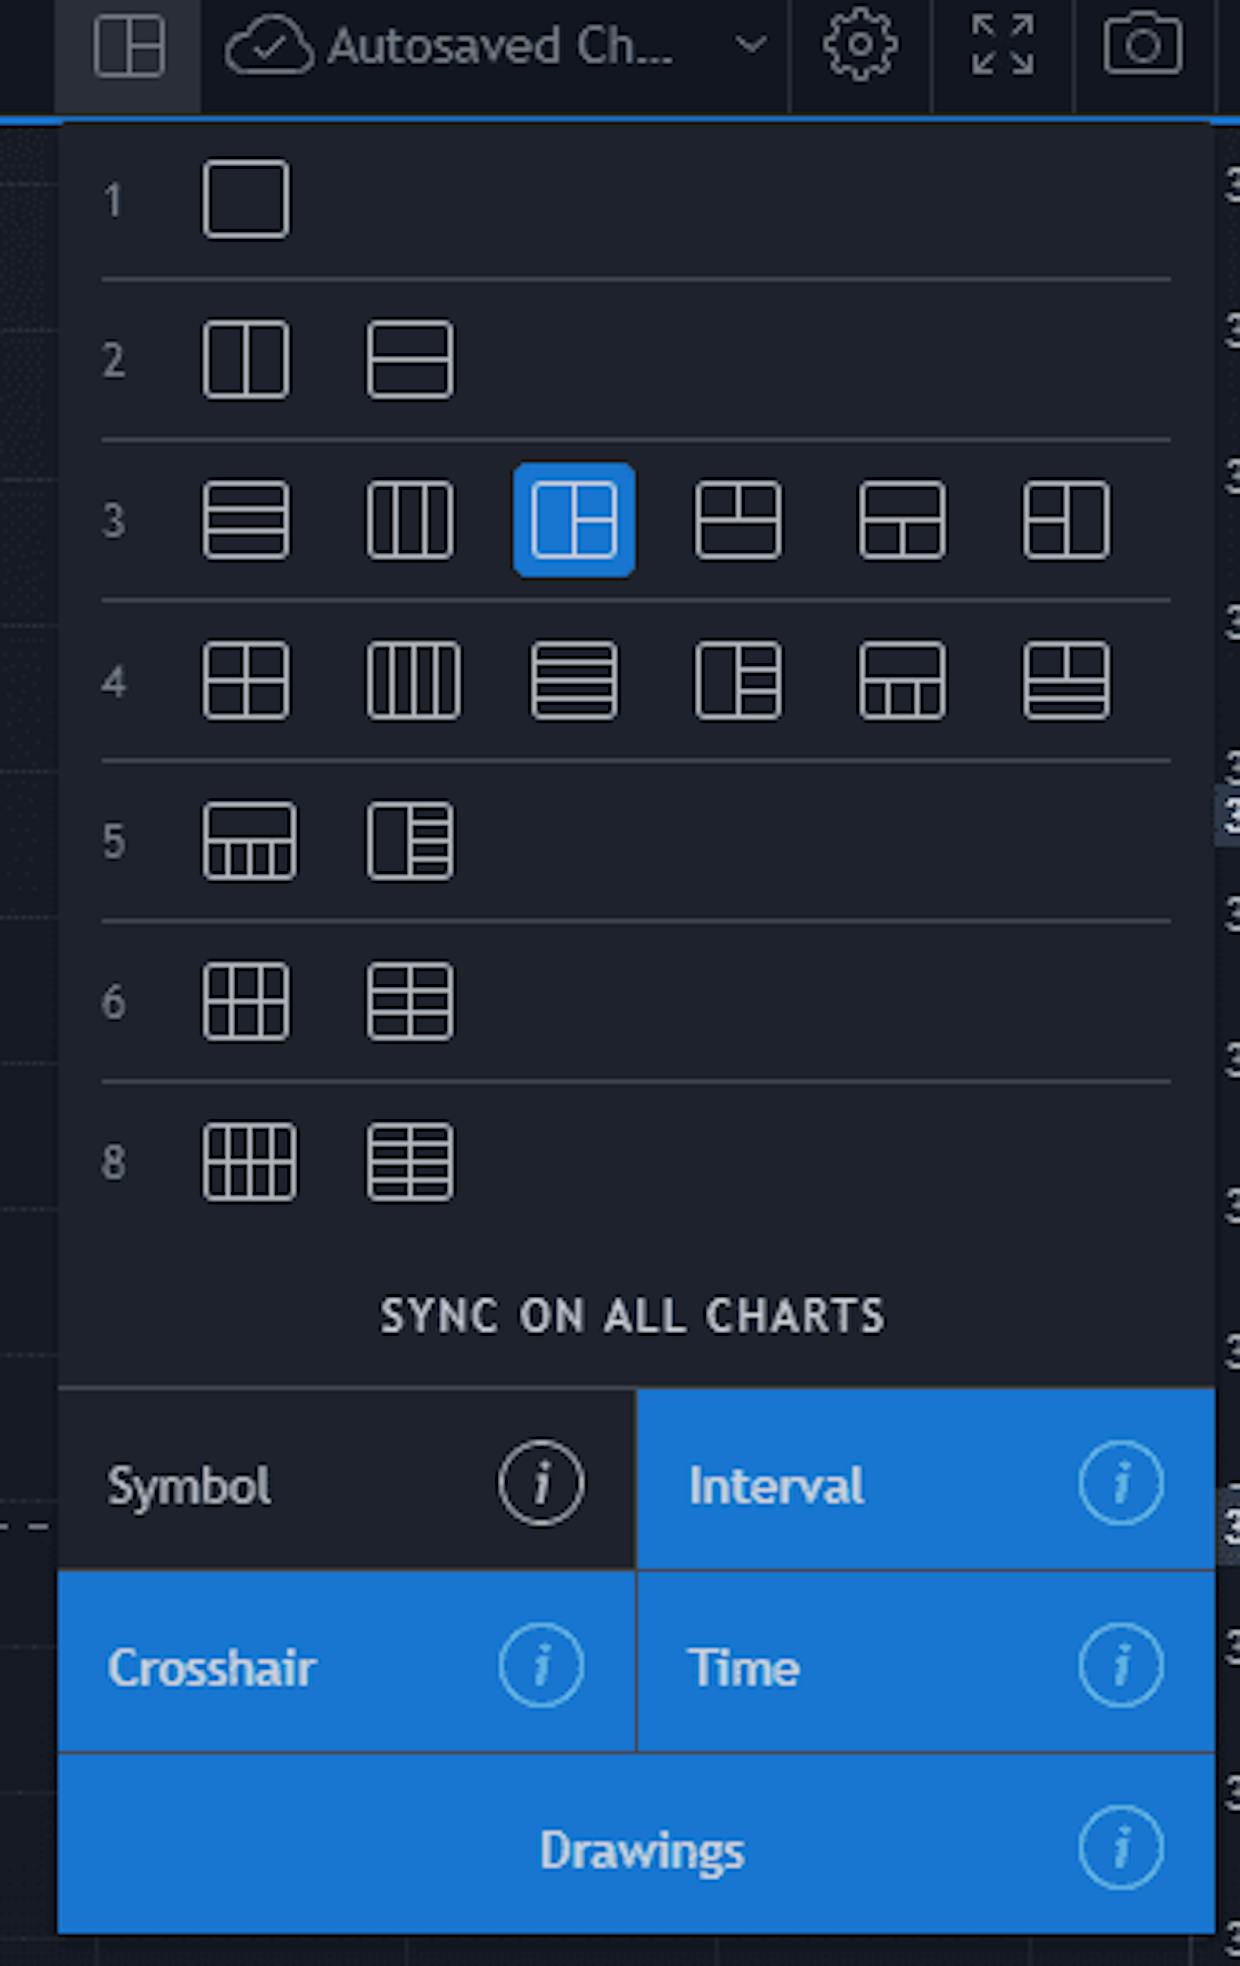 If you want, you can sync based on above options too.